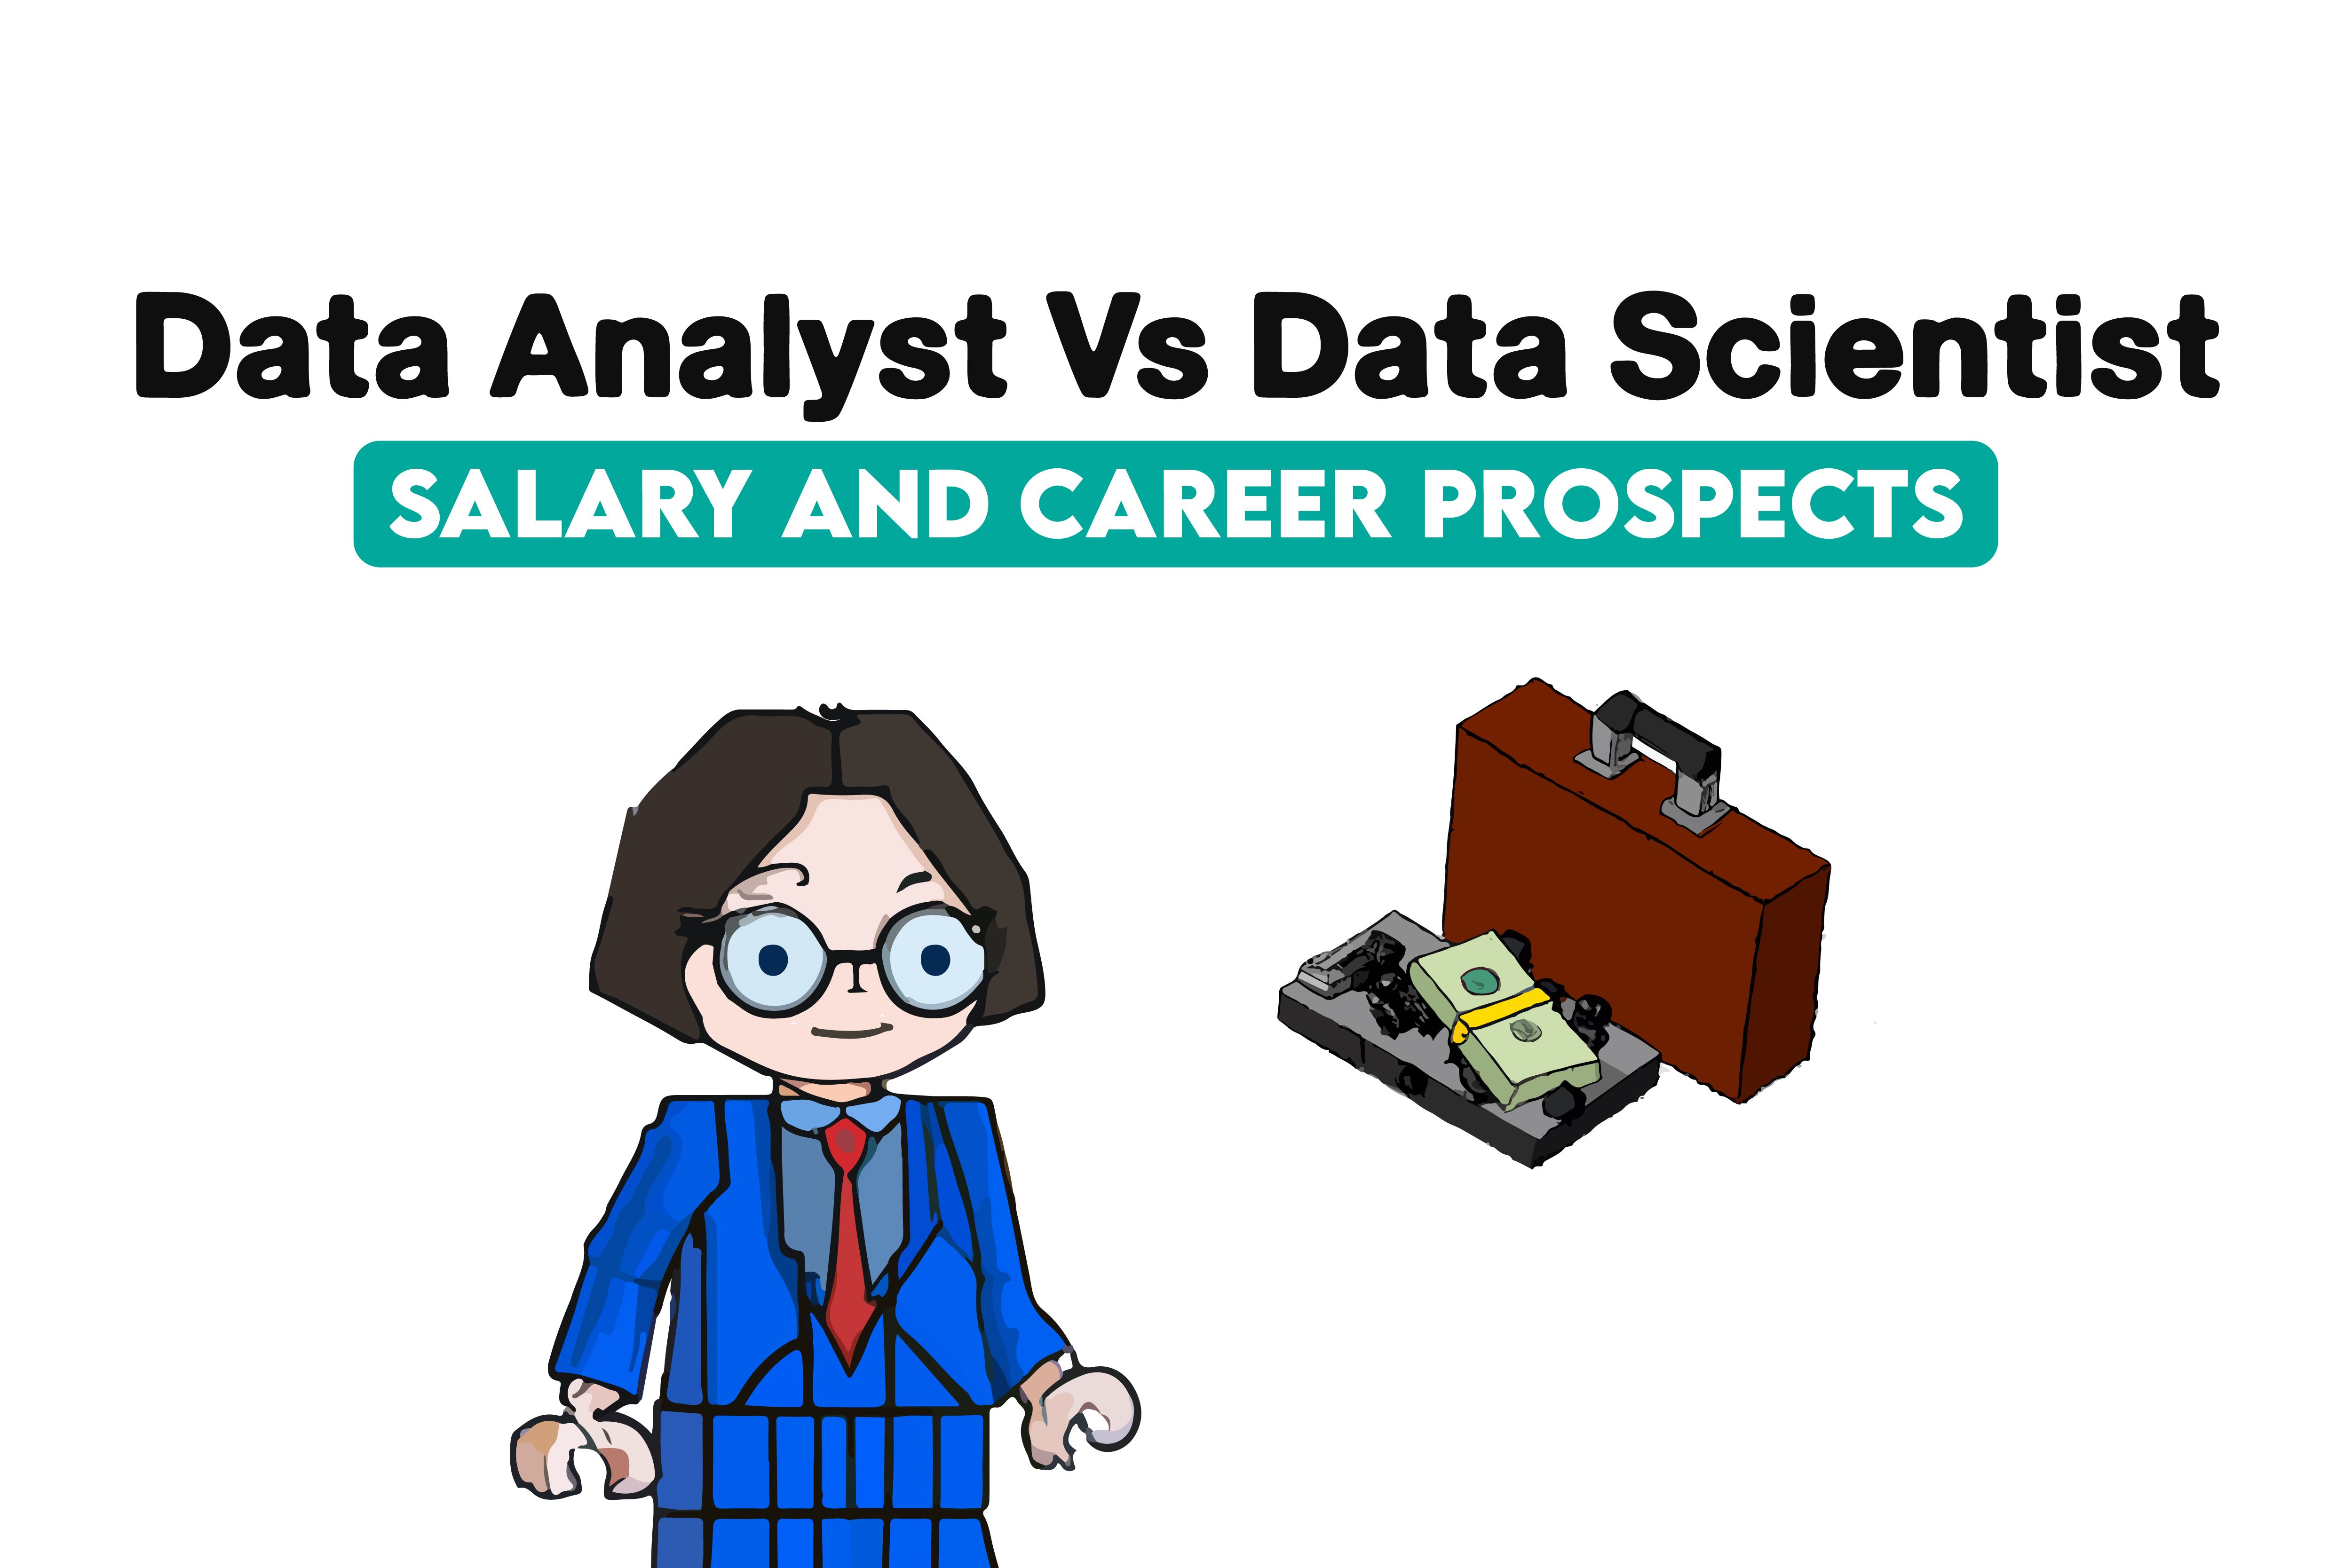 Data Analyst Vs Data Scientist Salary and Career Prospects